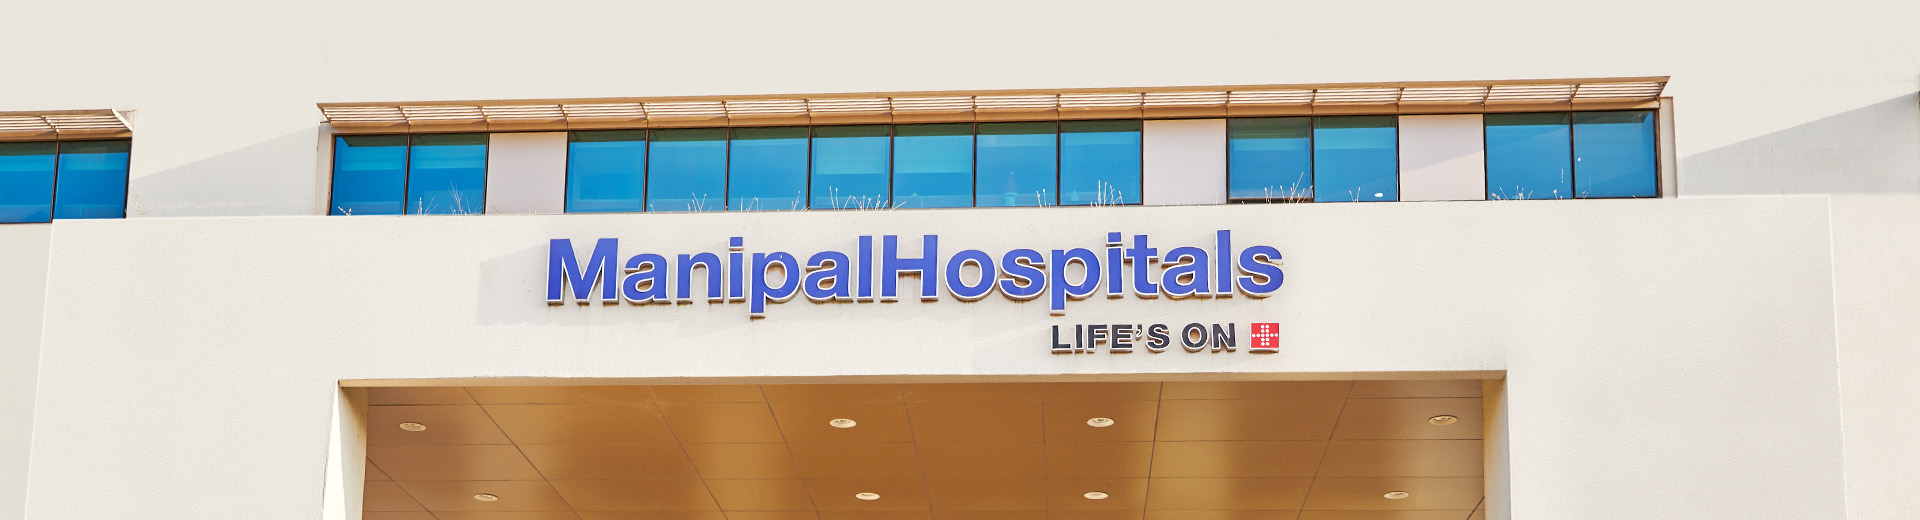 Privacy Policy of Manipal Hospitals Panjim,Goa